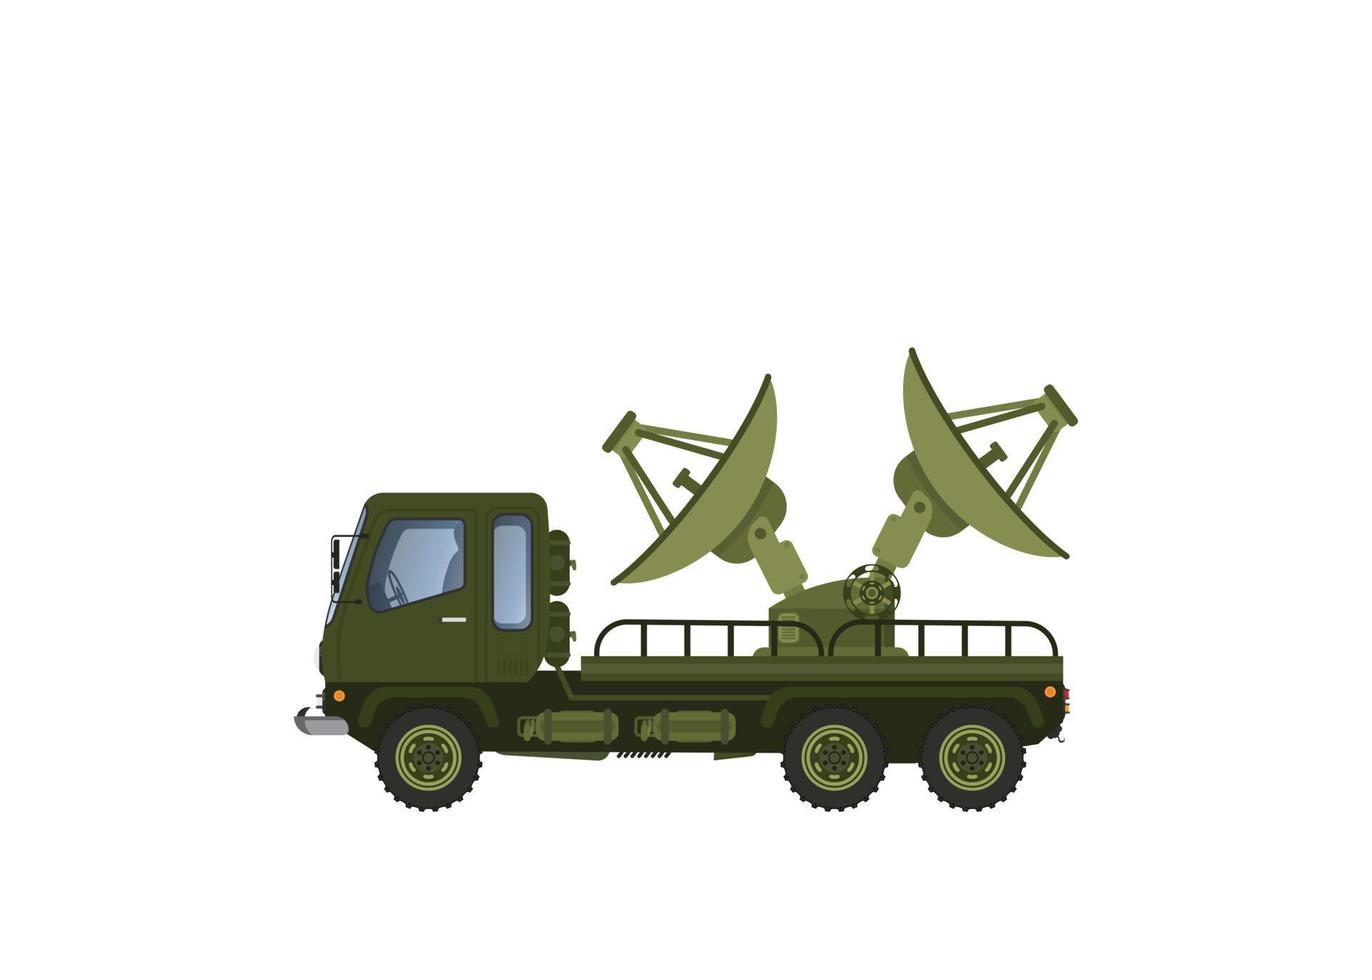 Military truck. Army transport with antenna. Modern appliances in protective green color. Radar and detection system. Scanning and recognition. Cartoon illustration vector